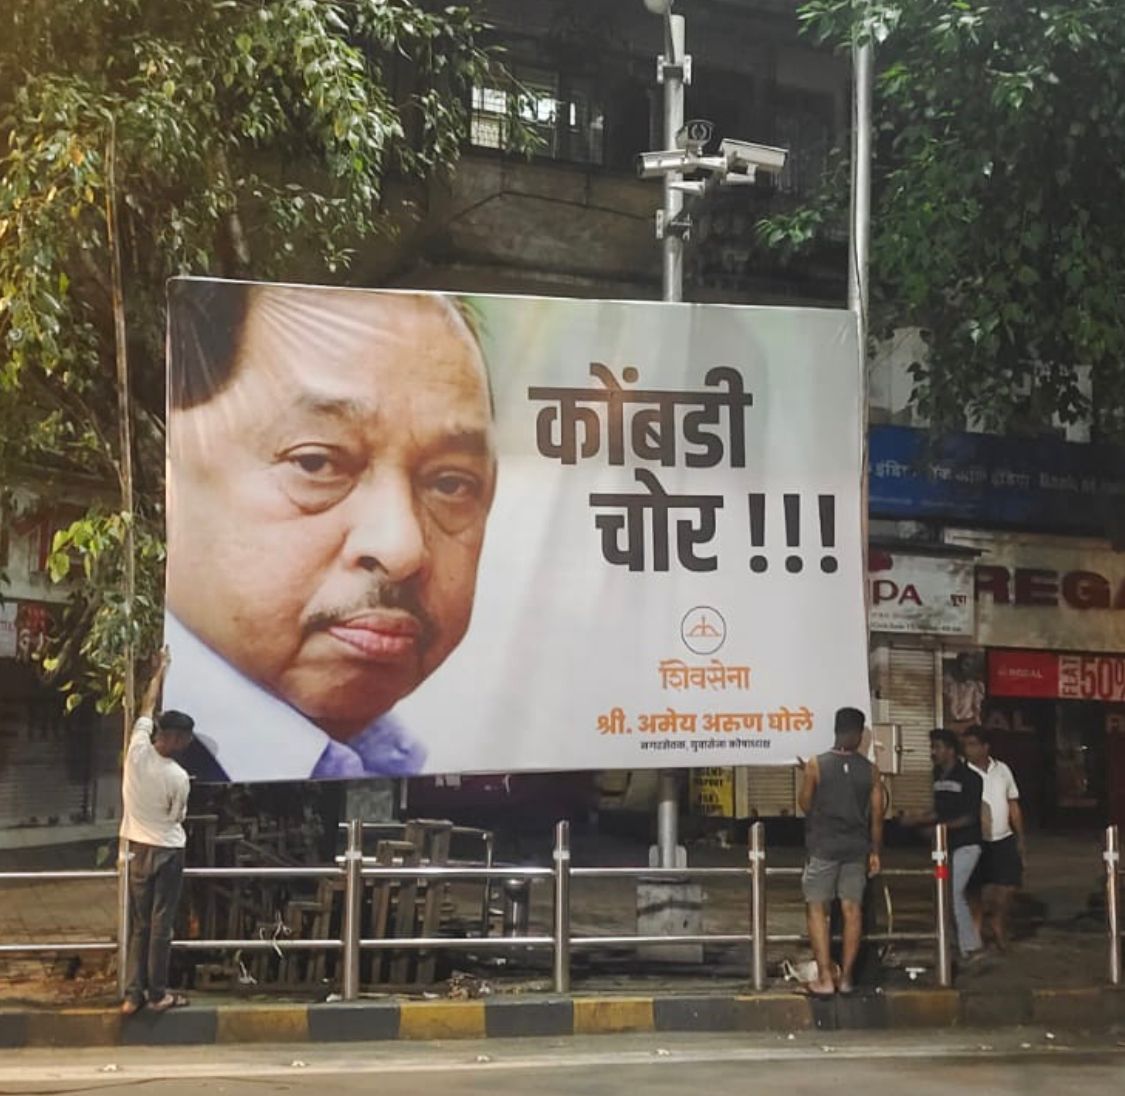 Narayan Rane made an offensive statement against the Chief Minister